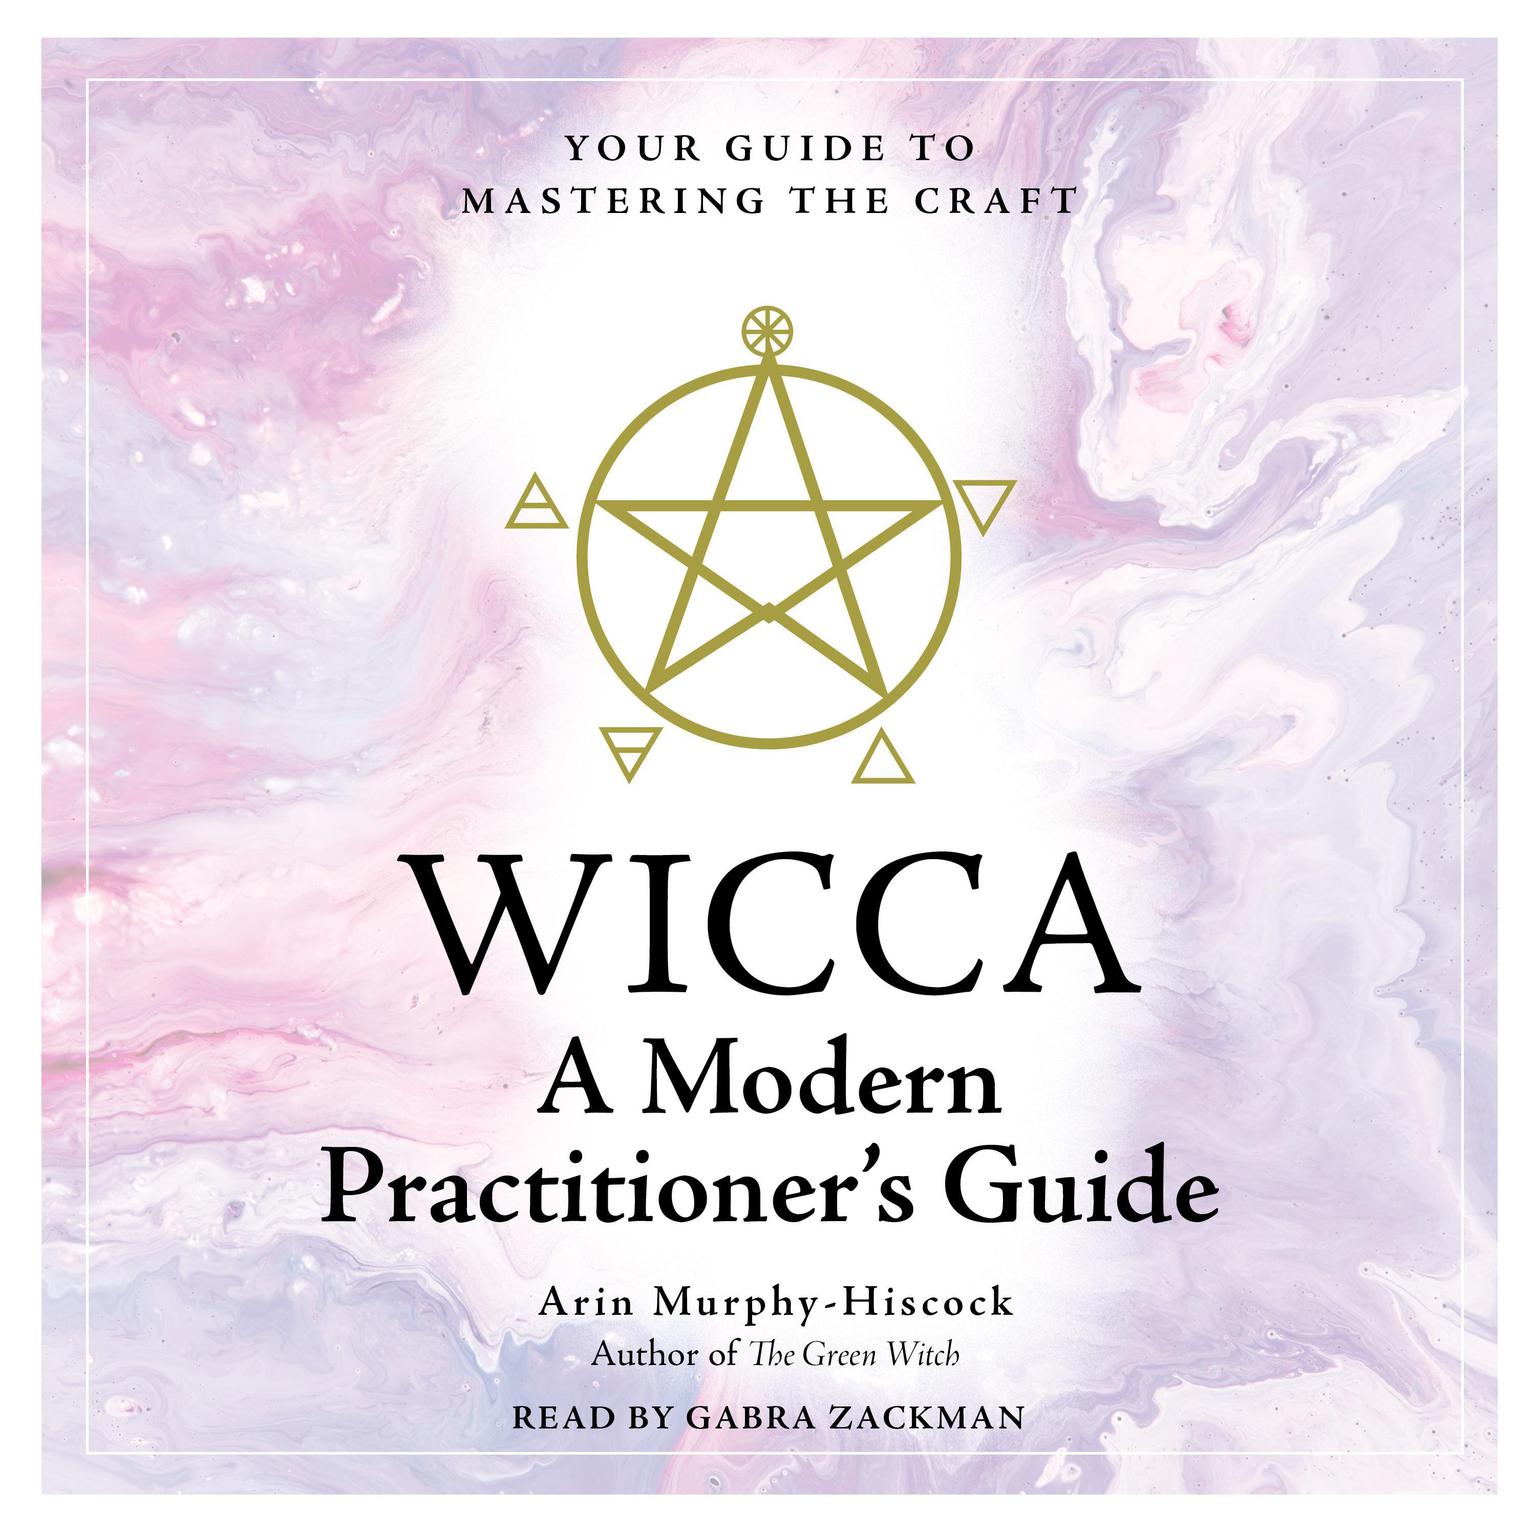 WICCA: A Modern Practitioners Guide: Your Guide to Mastering the Craft Audiobook, by Arin Murphy-Hiscock